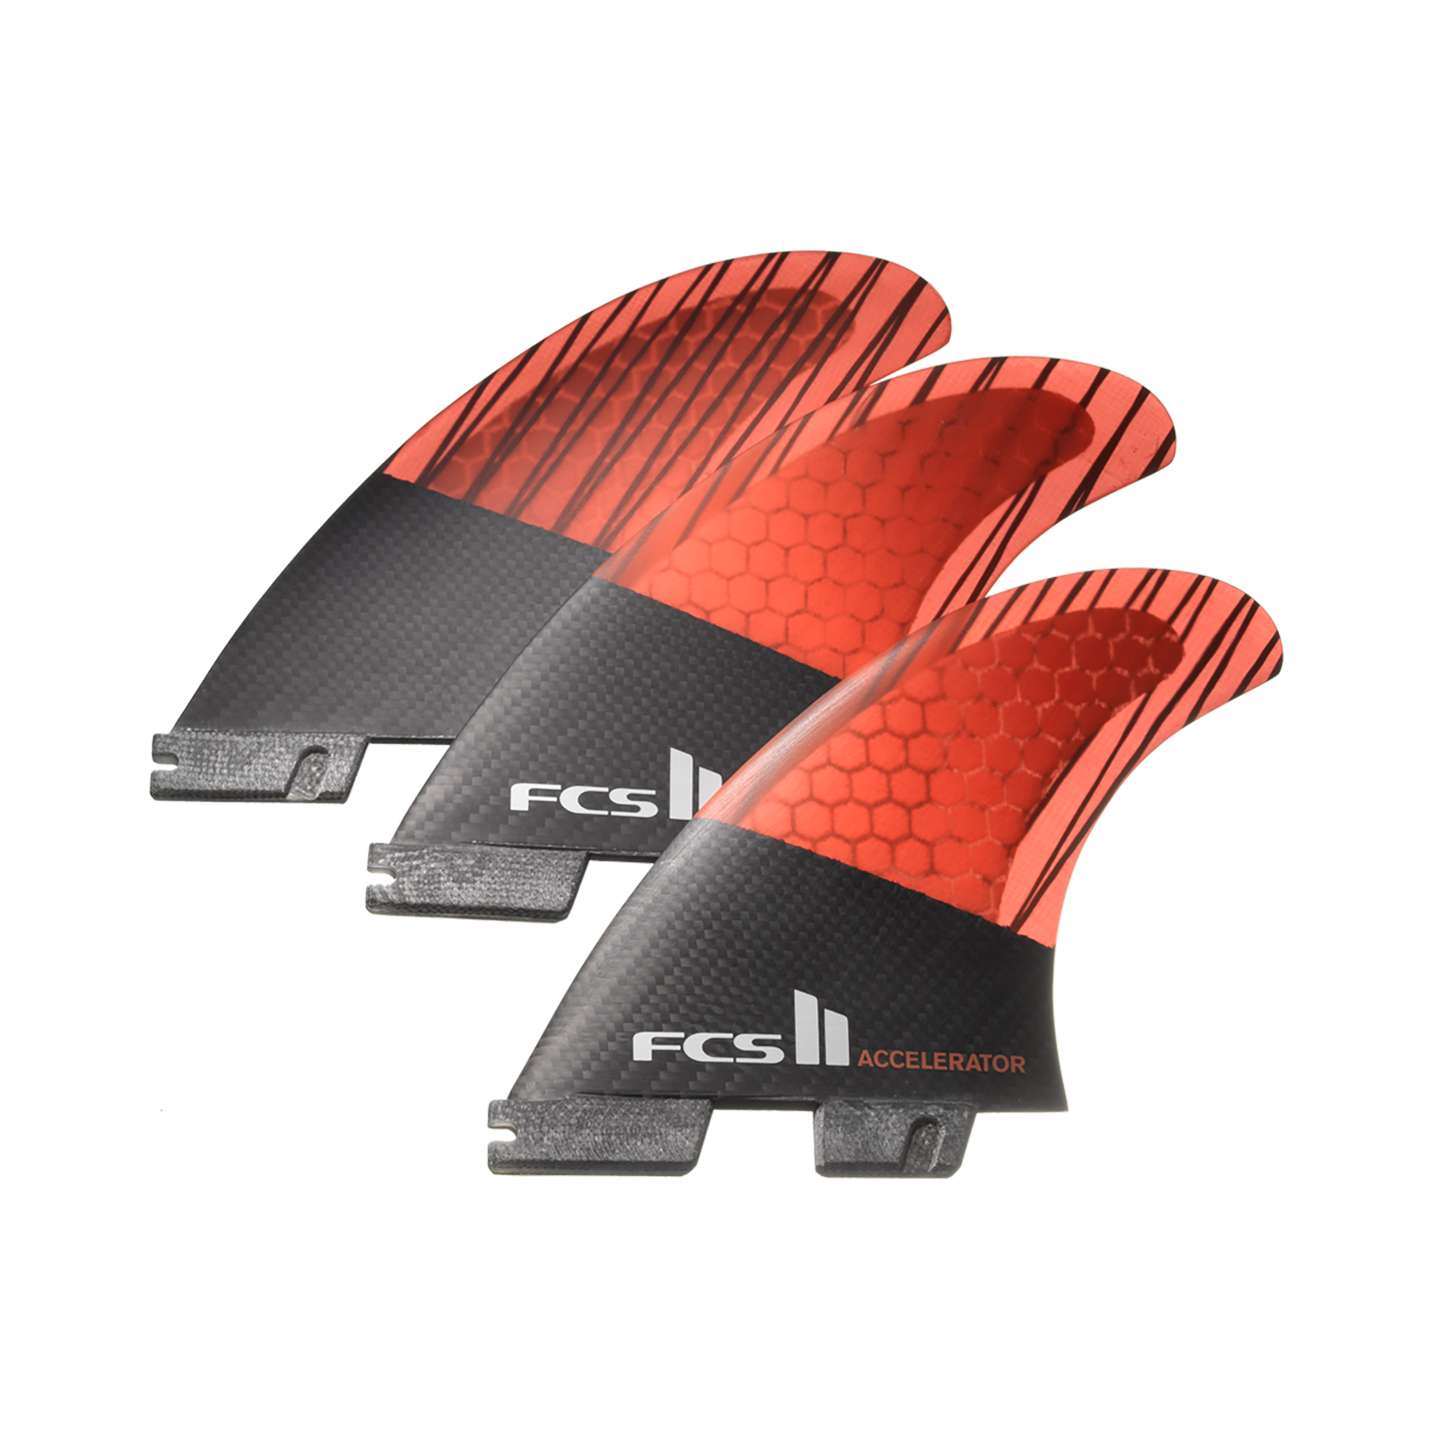 Details about   FCS II Accelerator PC Carbon Tri Fin Set Oversized so you get a heap of drive 